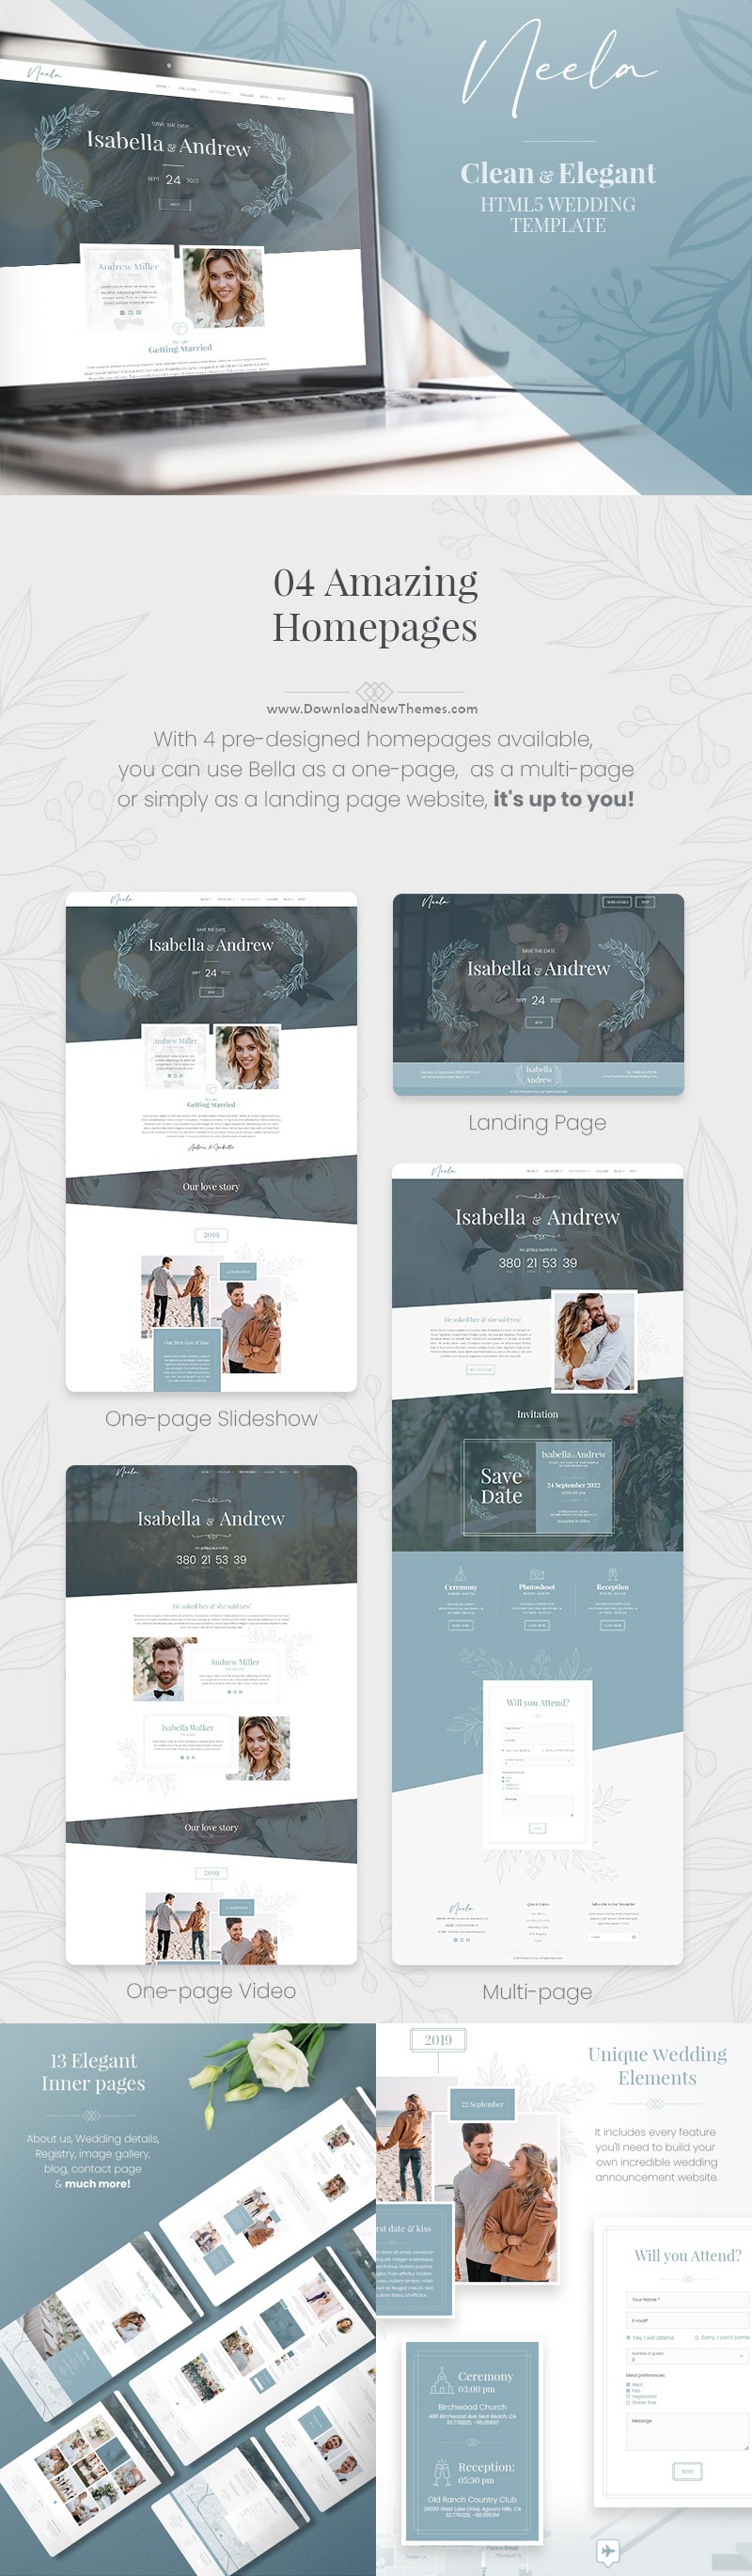 Neela - One-Page Multi-page Wedding HTML5 Template